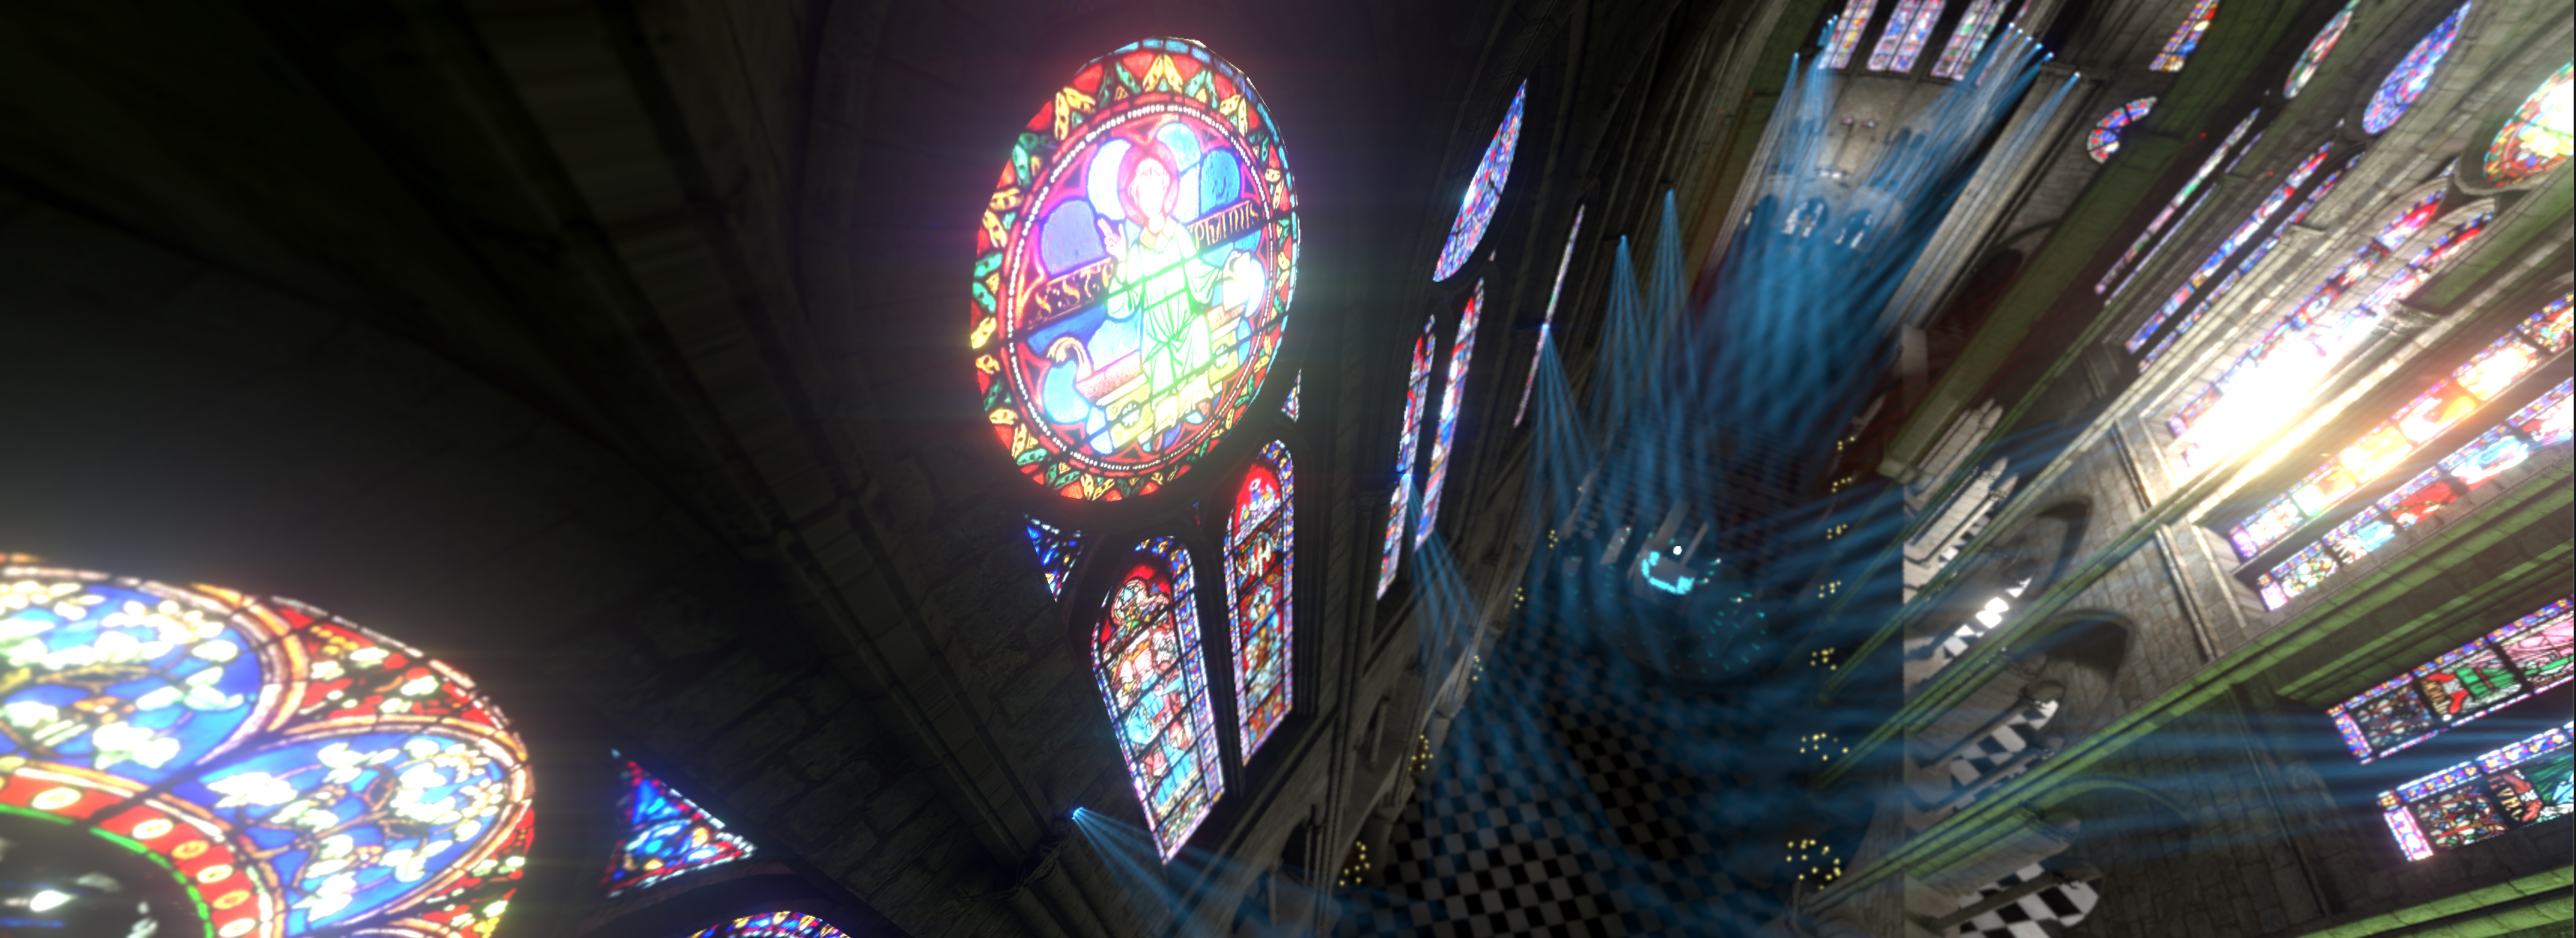 Image of showing the stage set for the virtual "Welcome to the Other Side" concert on New Years Eve inside Notre Dame Cathedral